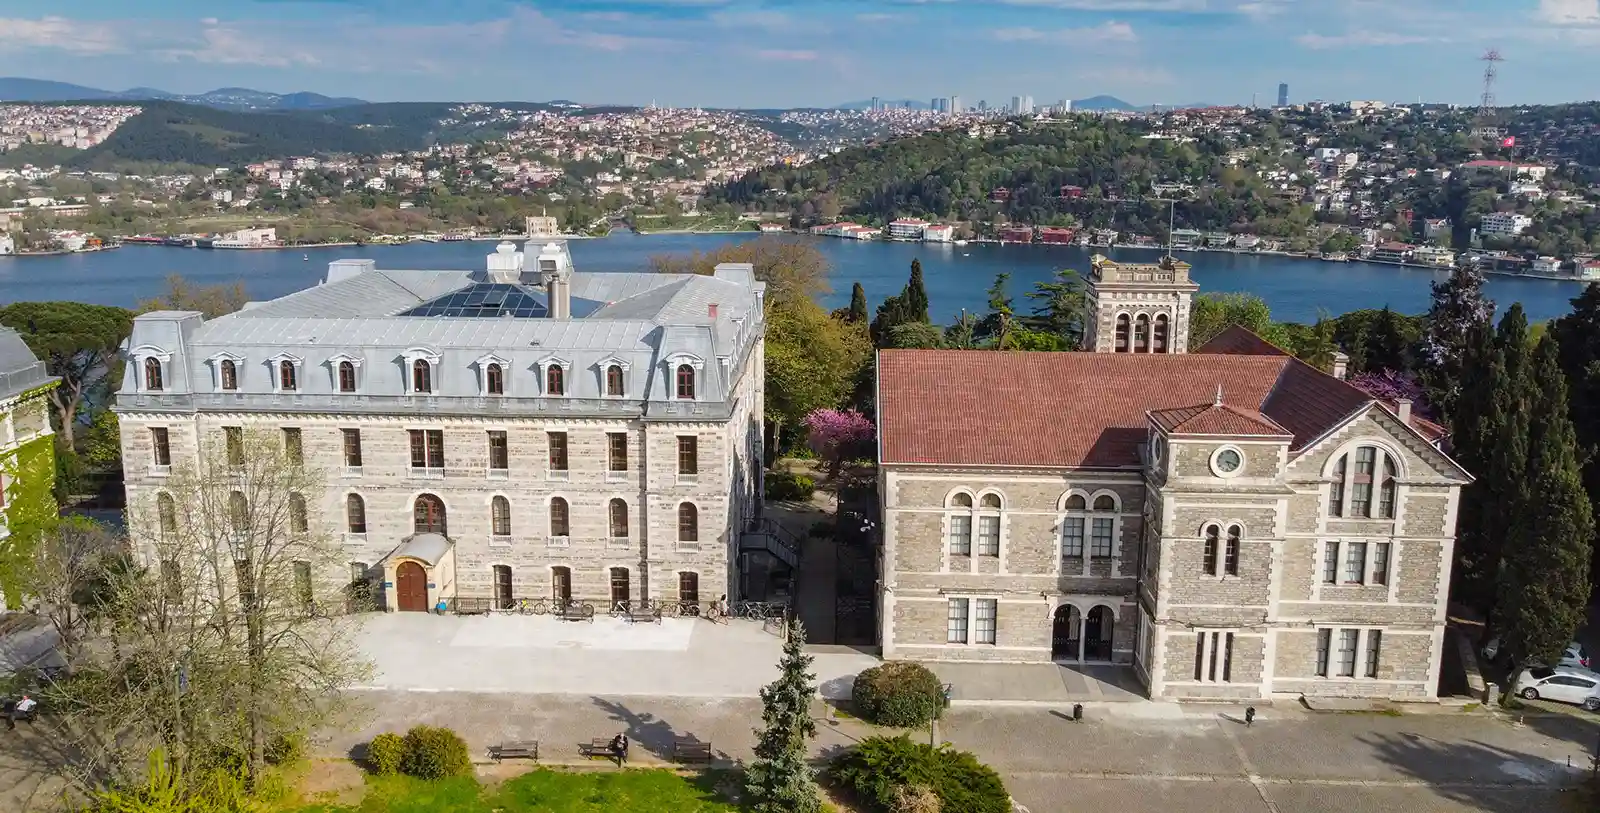 Bogazici University is one of the most known universities in Turkey. It is located in one of the top locations of the city with direct view to the Bosphorus